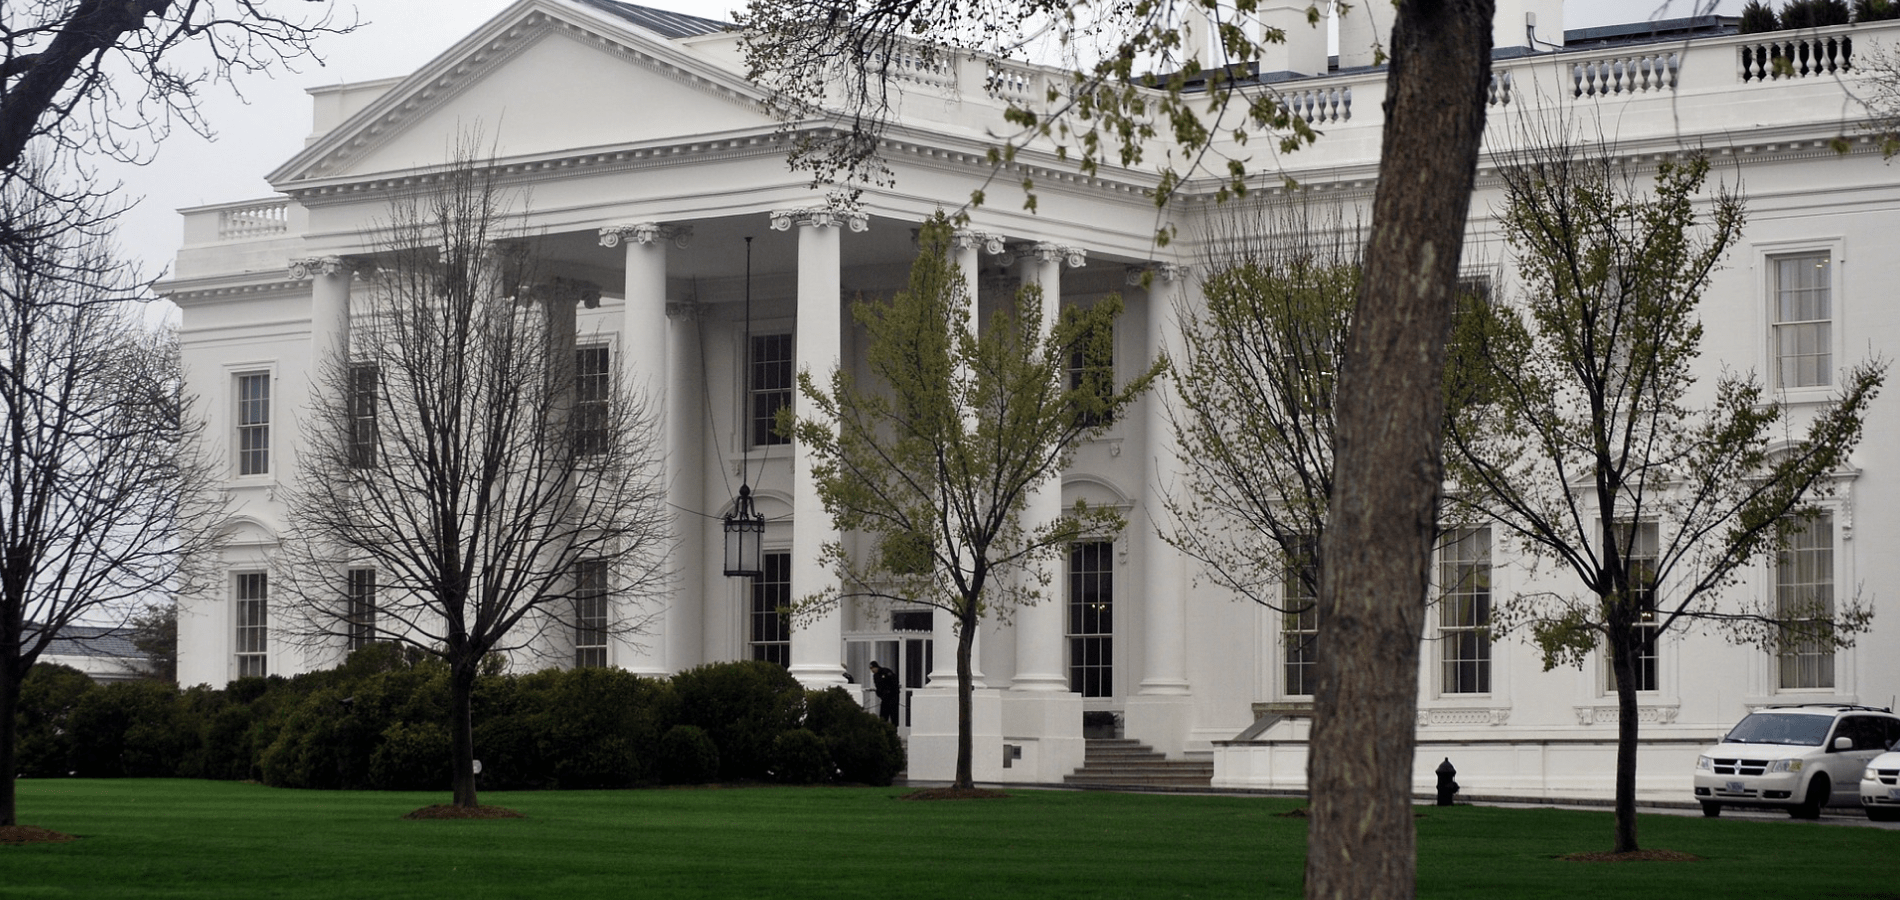 Side view of the White House